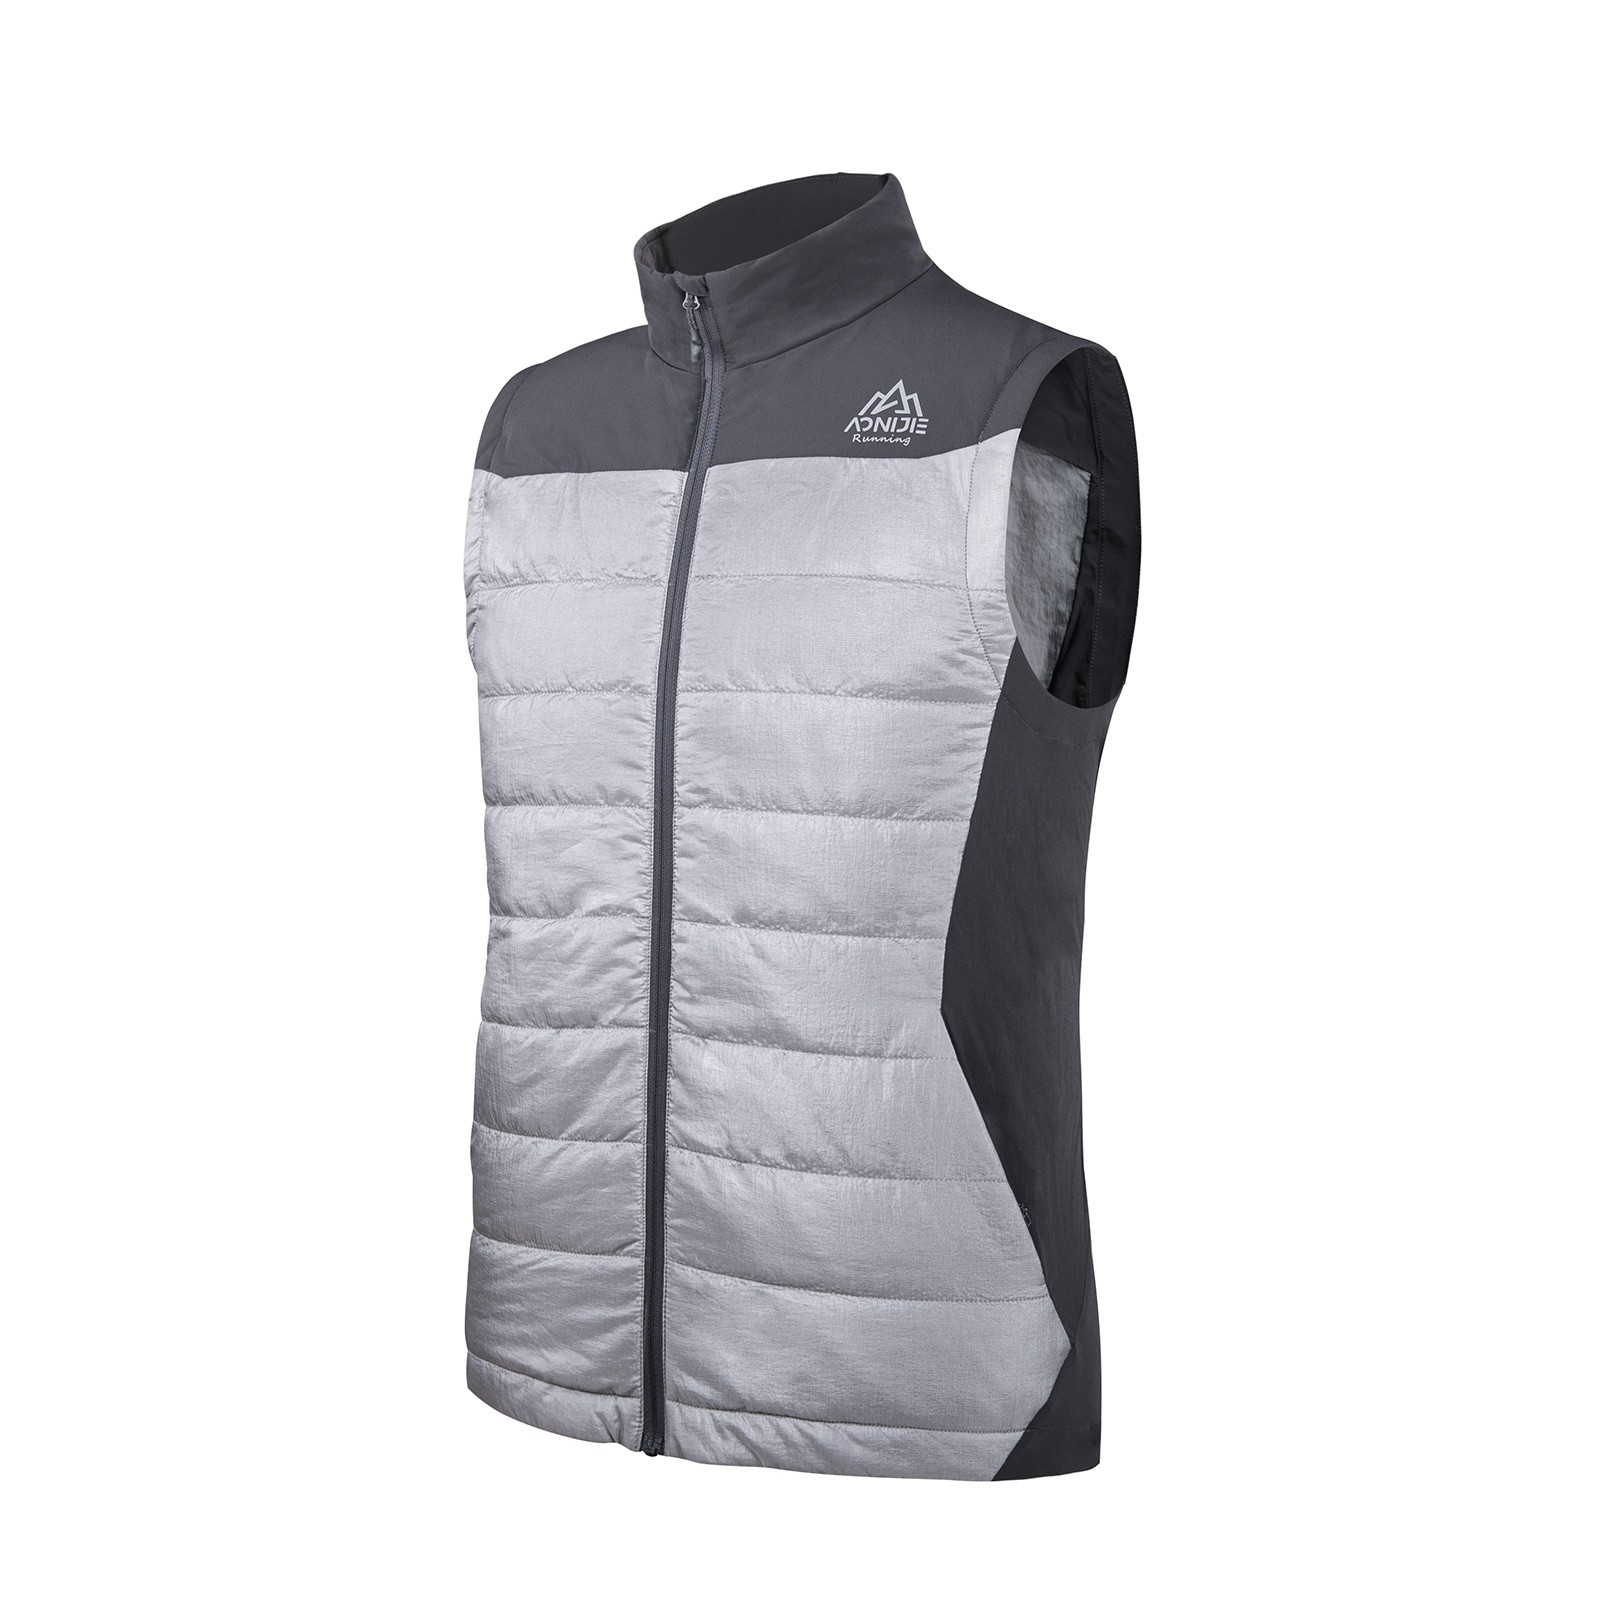 AONIJIE F5107 Outdoor Warm Vest Lightweight Breathable Sports Vest Clothes Thinsulate Cotton Thermal Vest Men Black Casual Vests